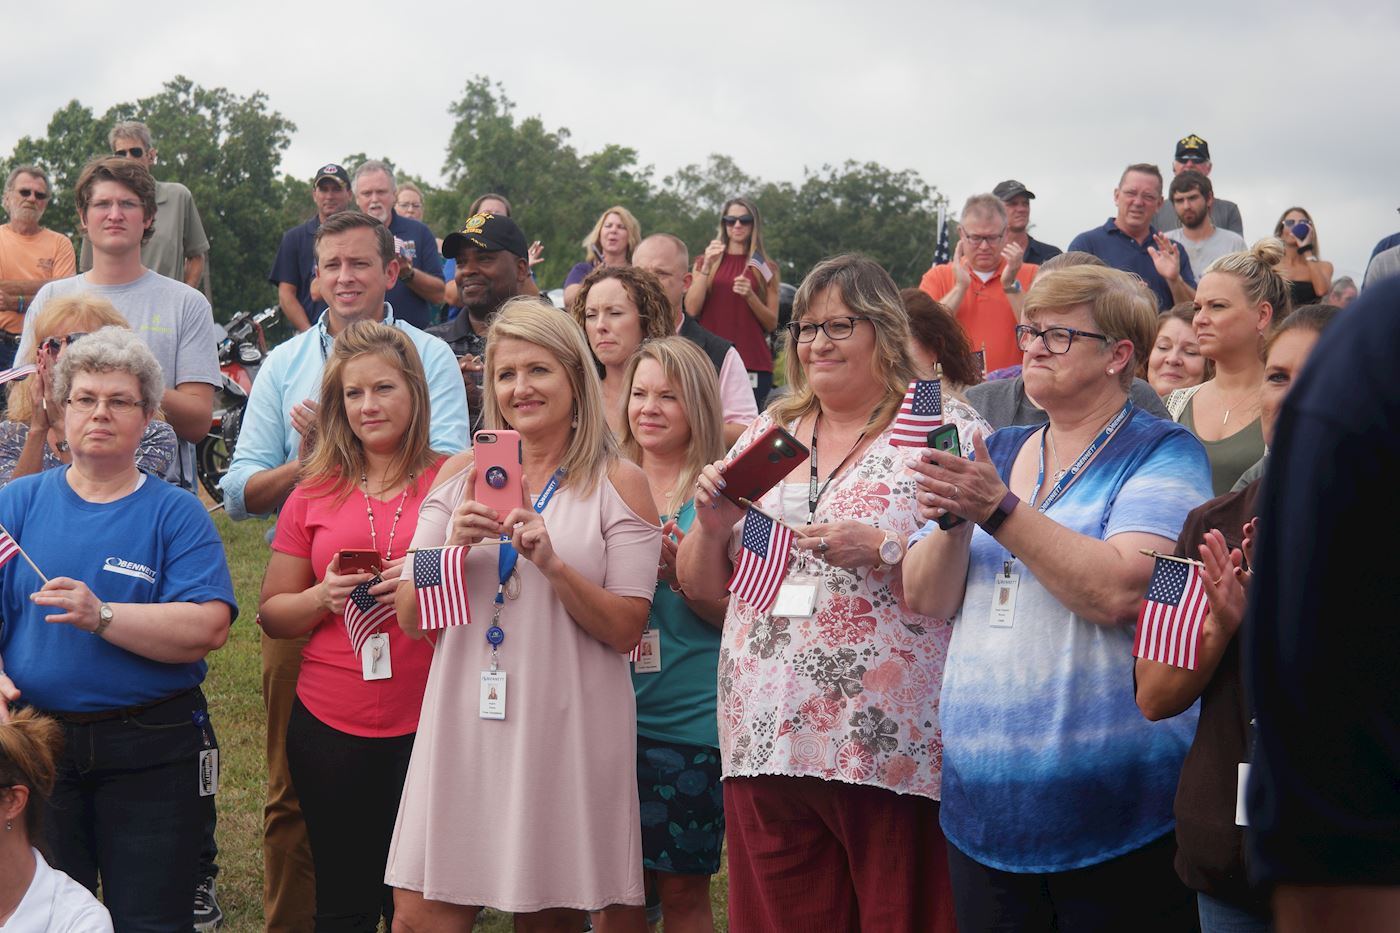 Bennett Home Office employees show their patriotism at the Wreaths of Honor Ride reception on the lawn.